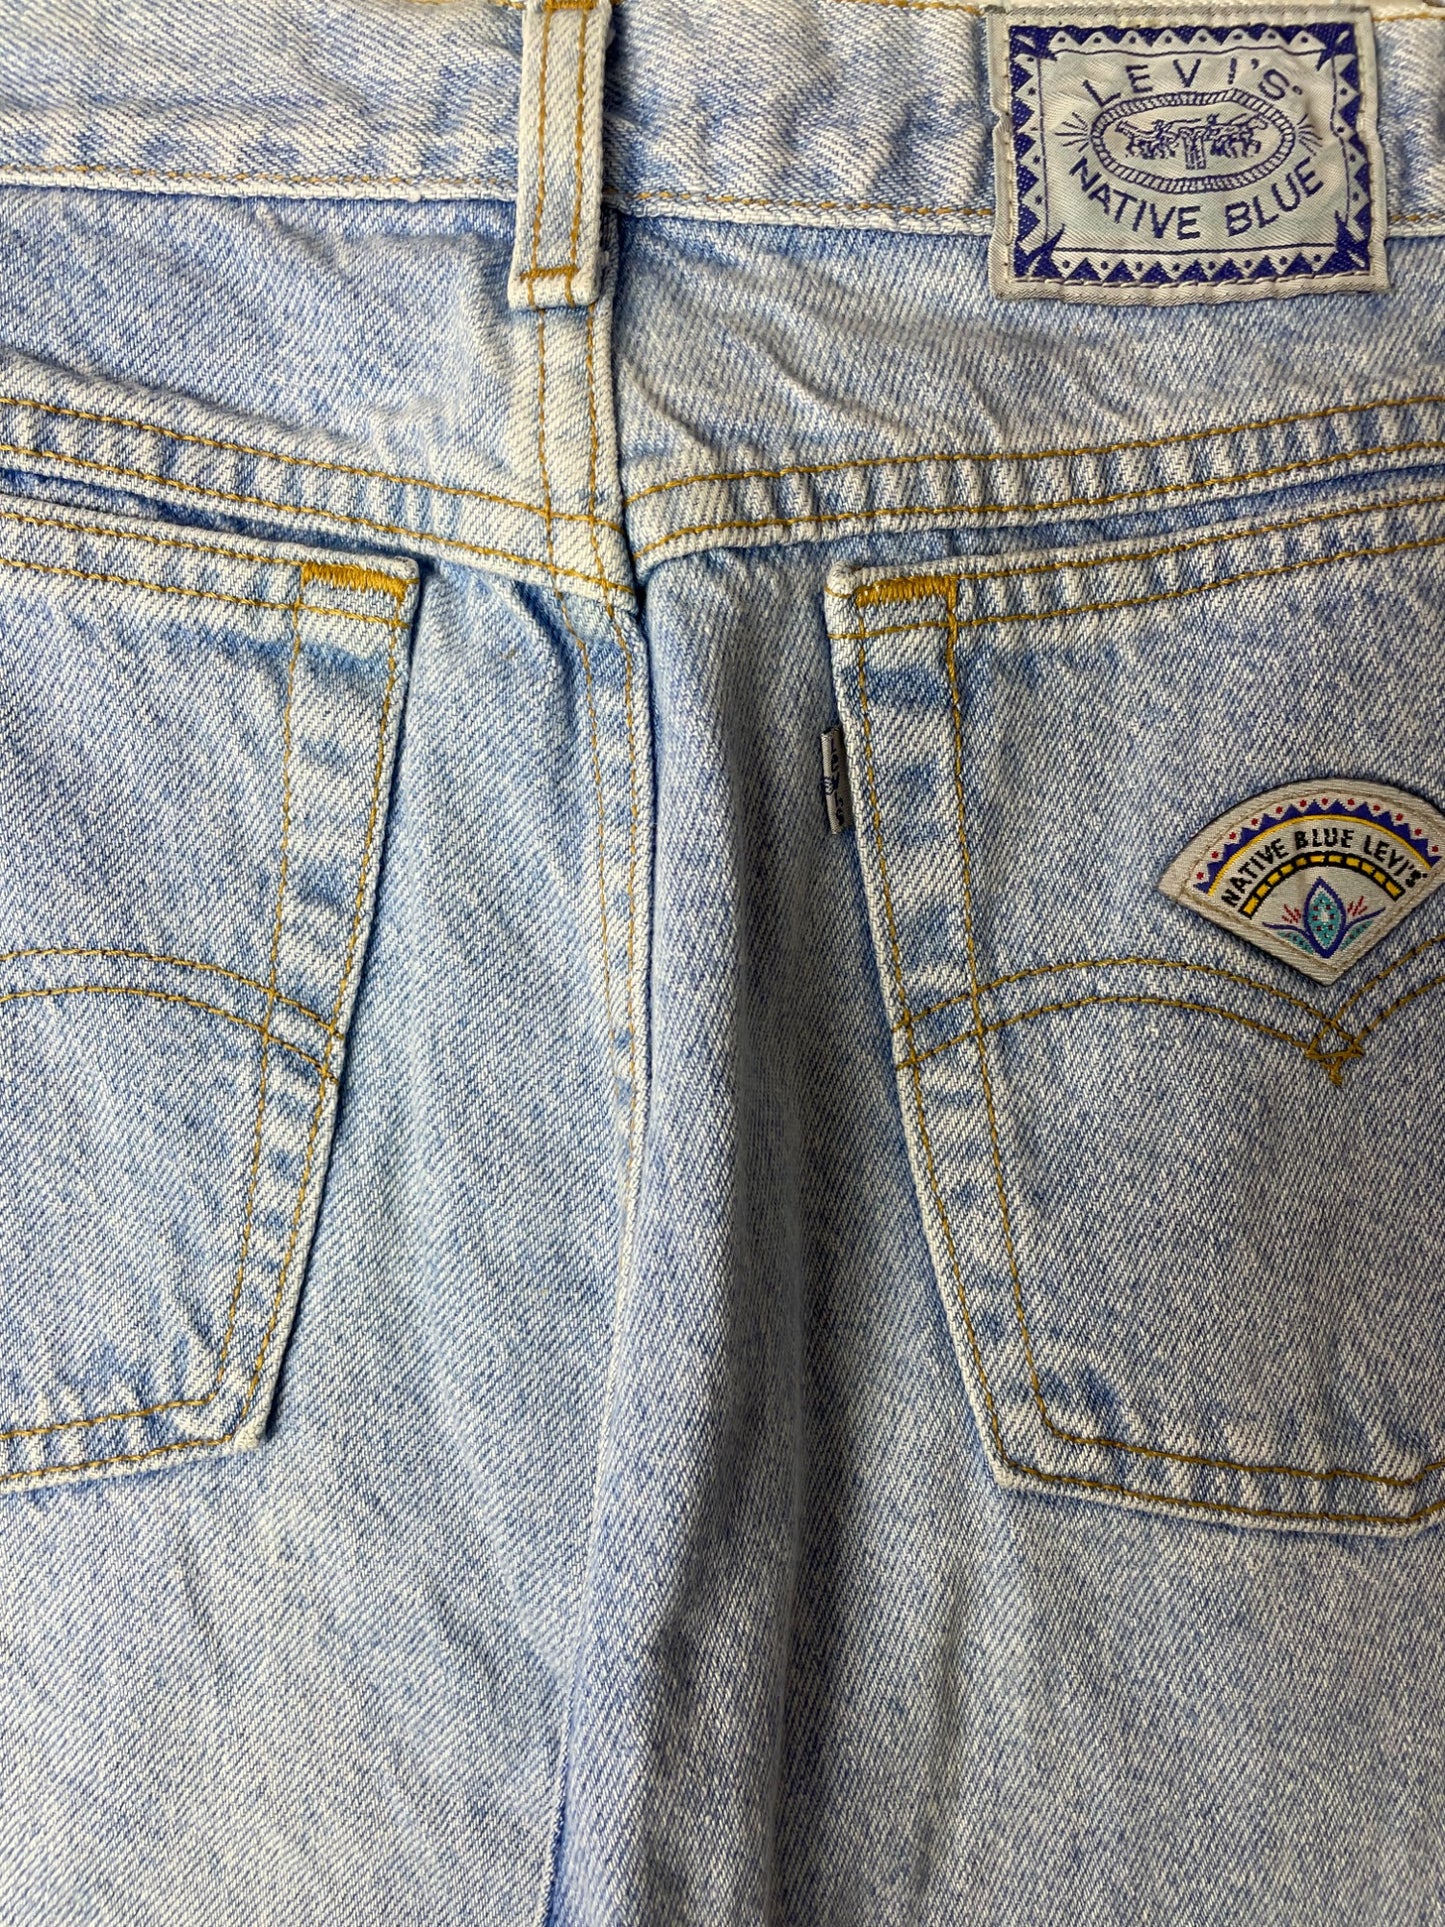 Levis Mom Jeans Native Blue